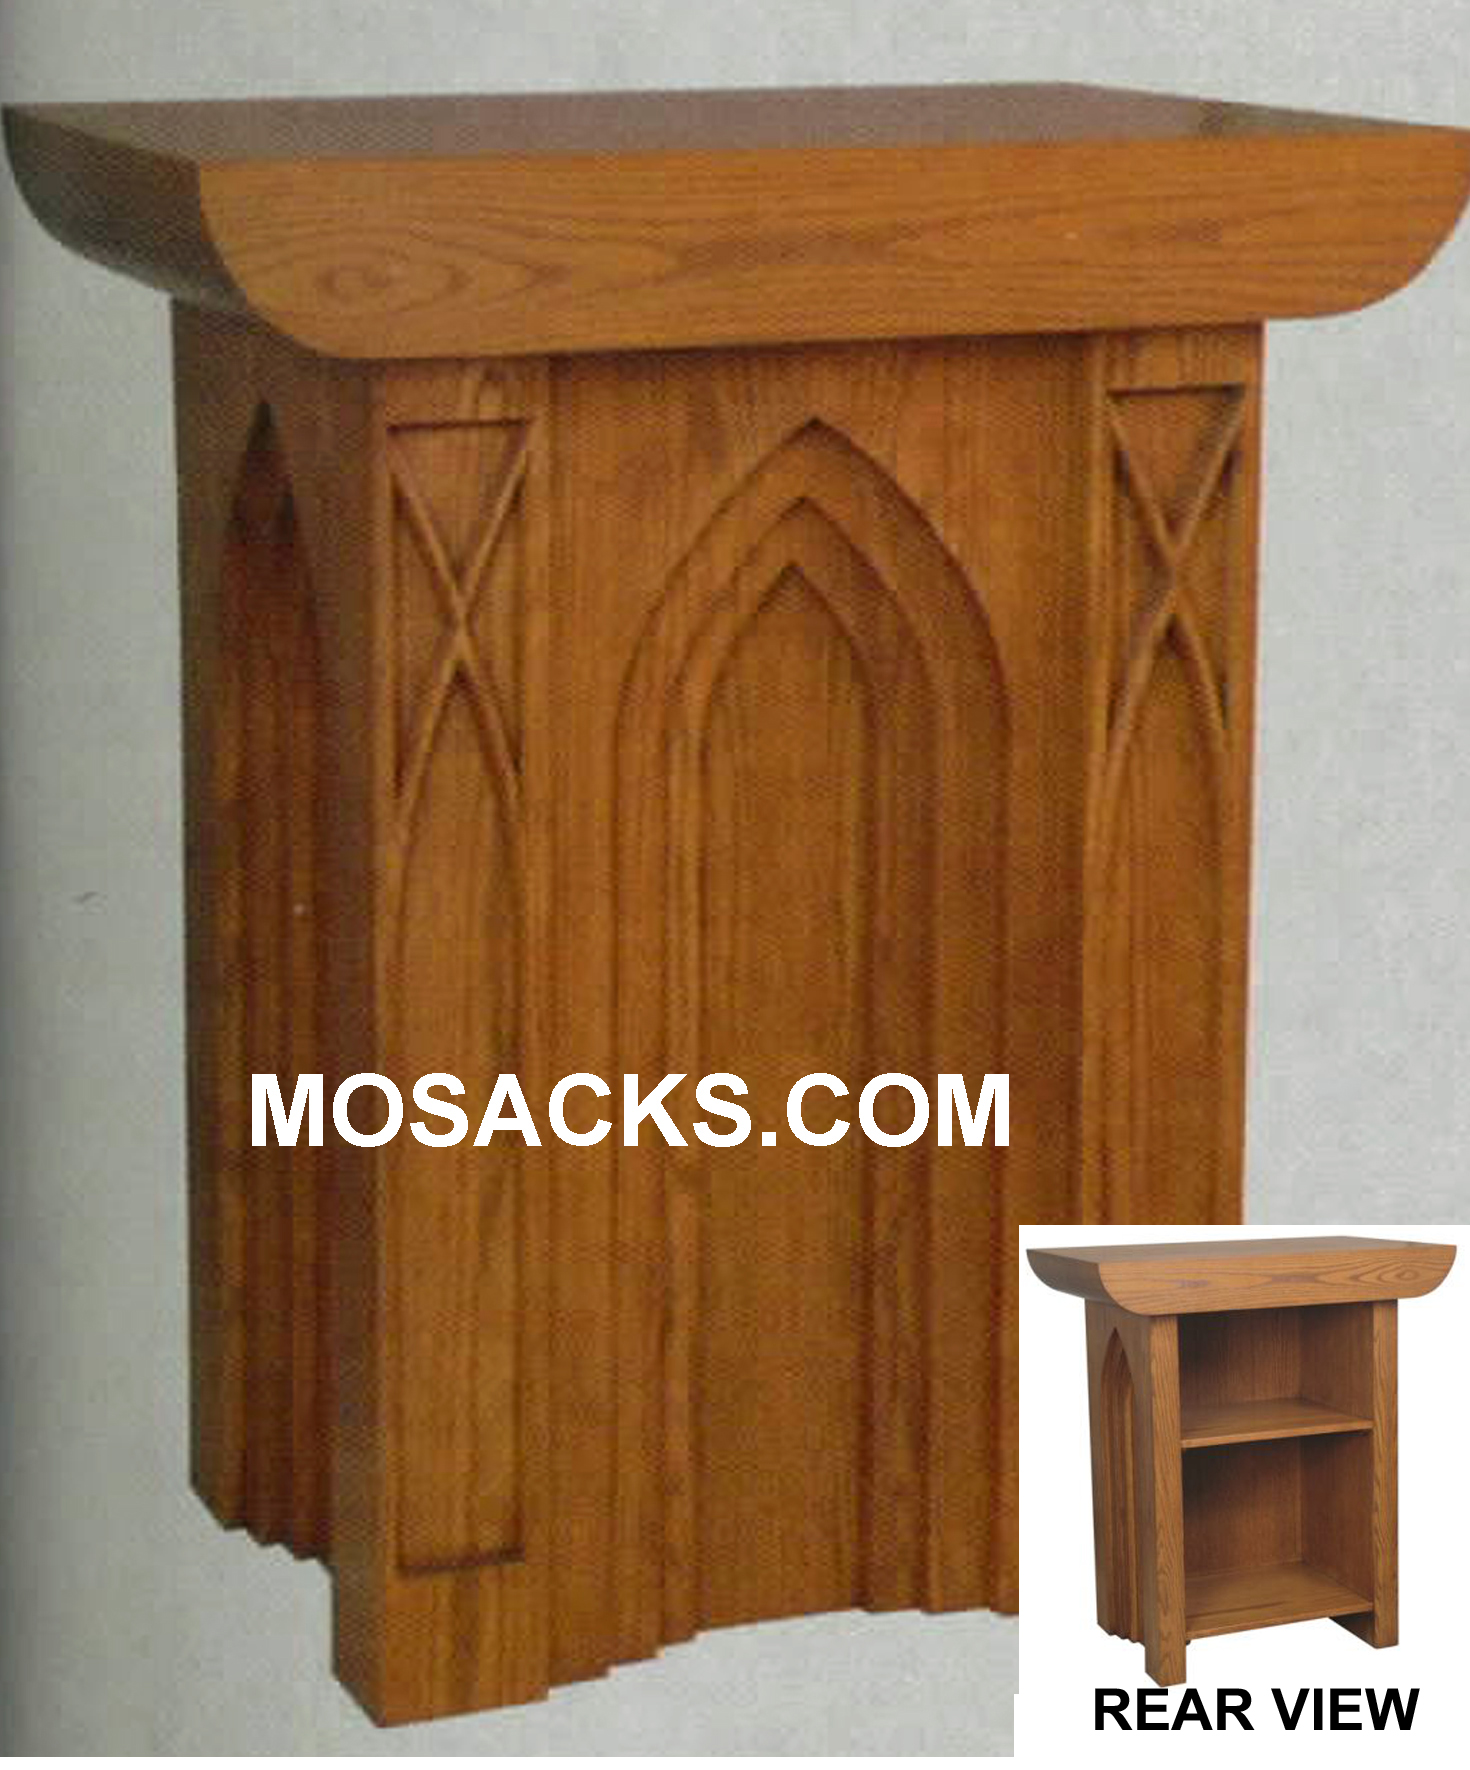 Altar - Wood Altar with Gothic Arches 60" wide x 62" deep x 40" high 40-637 Available in Various Wood Finishes